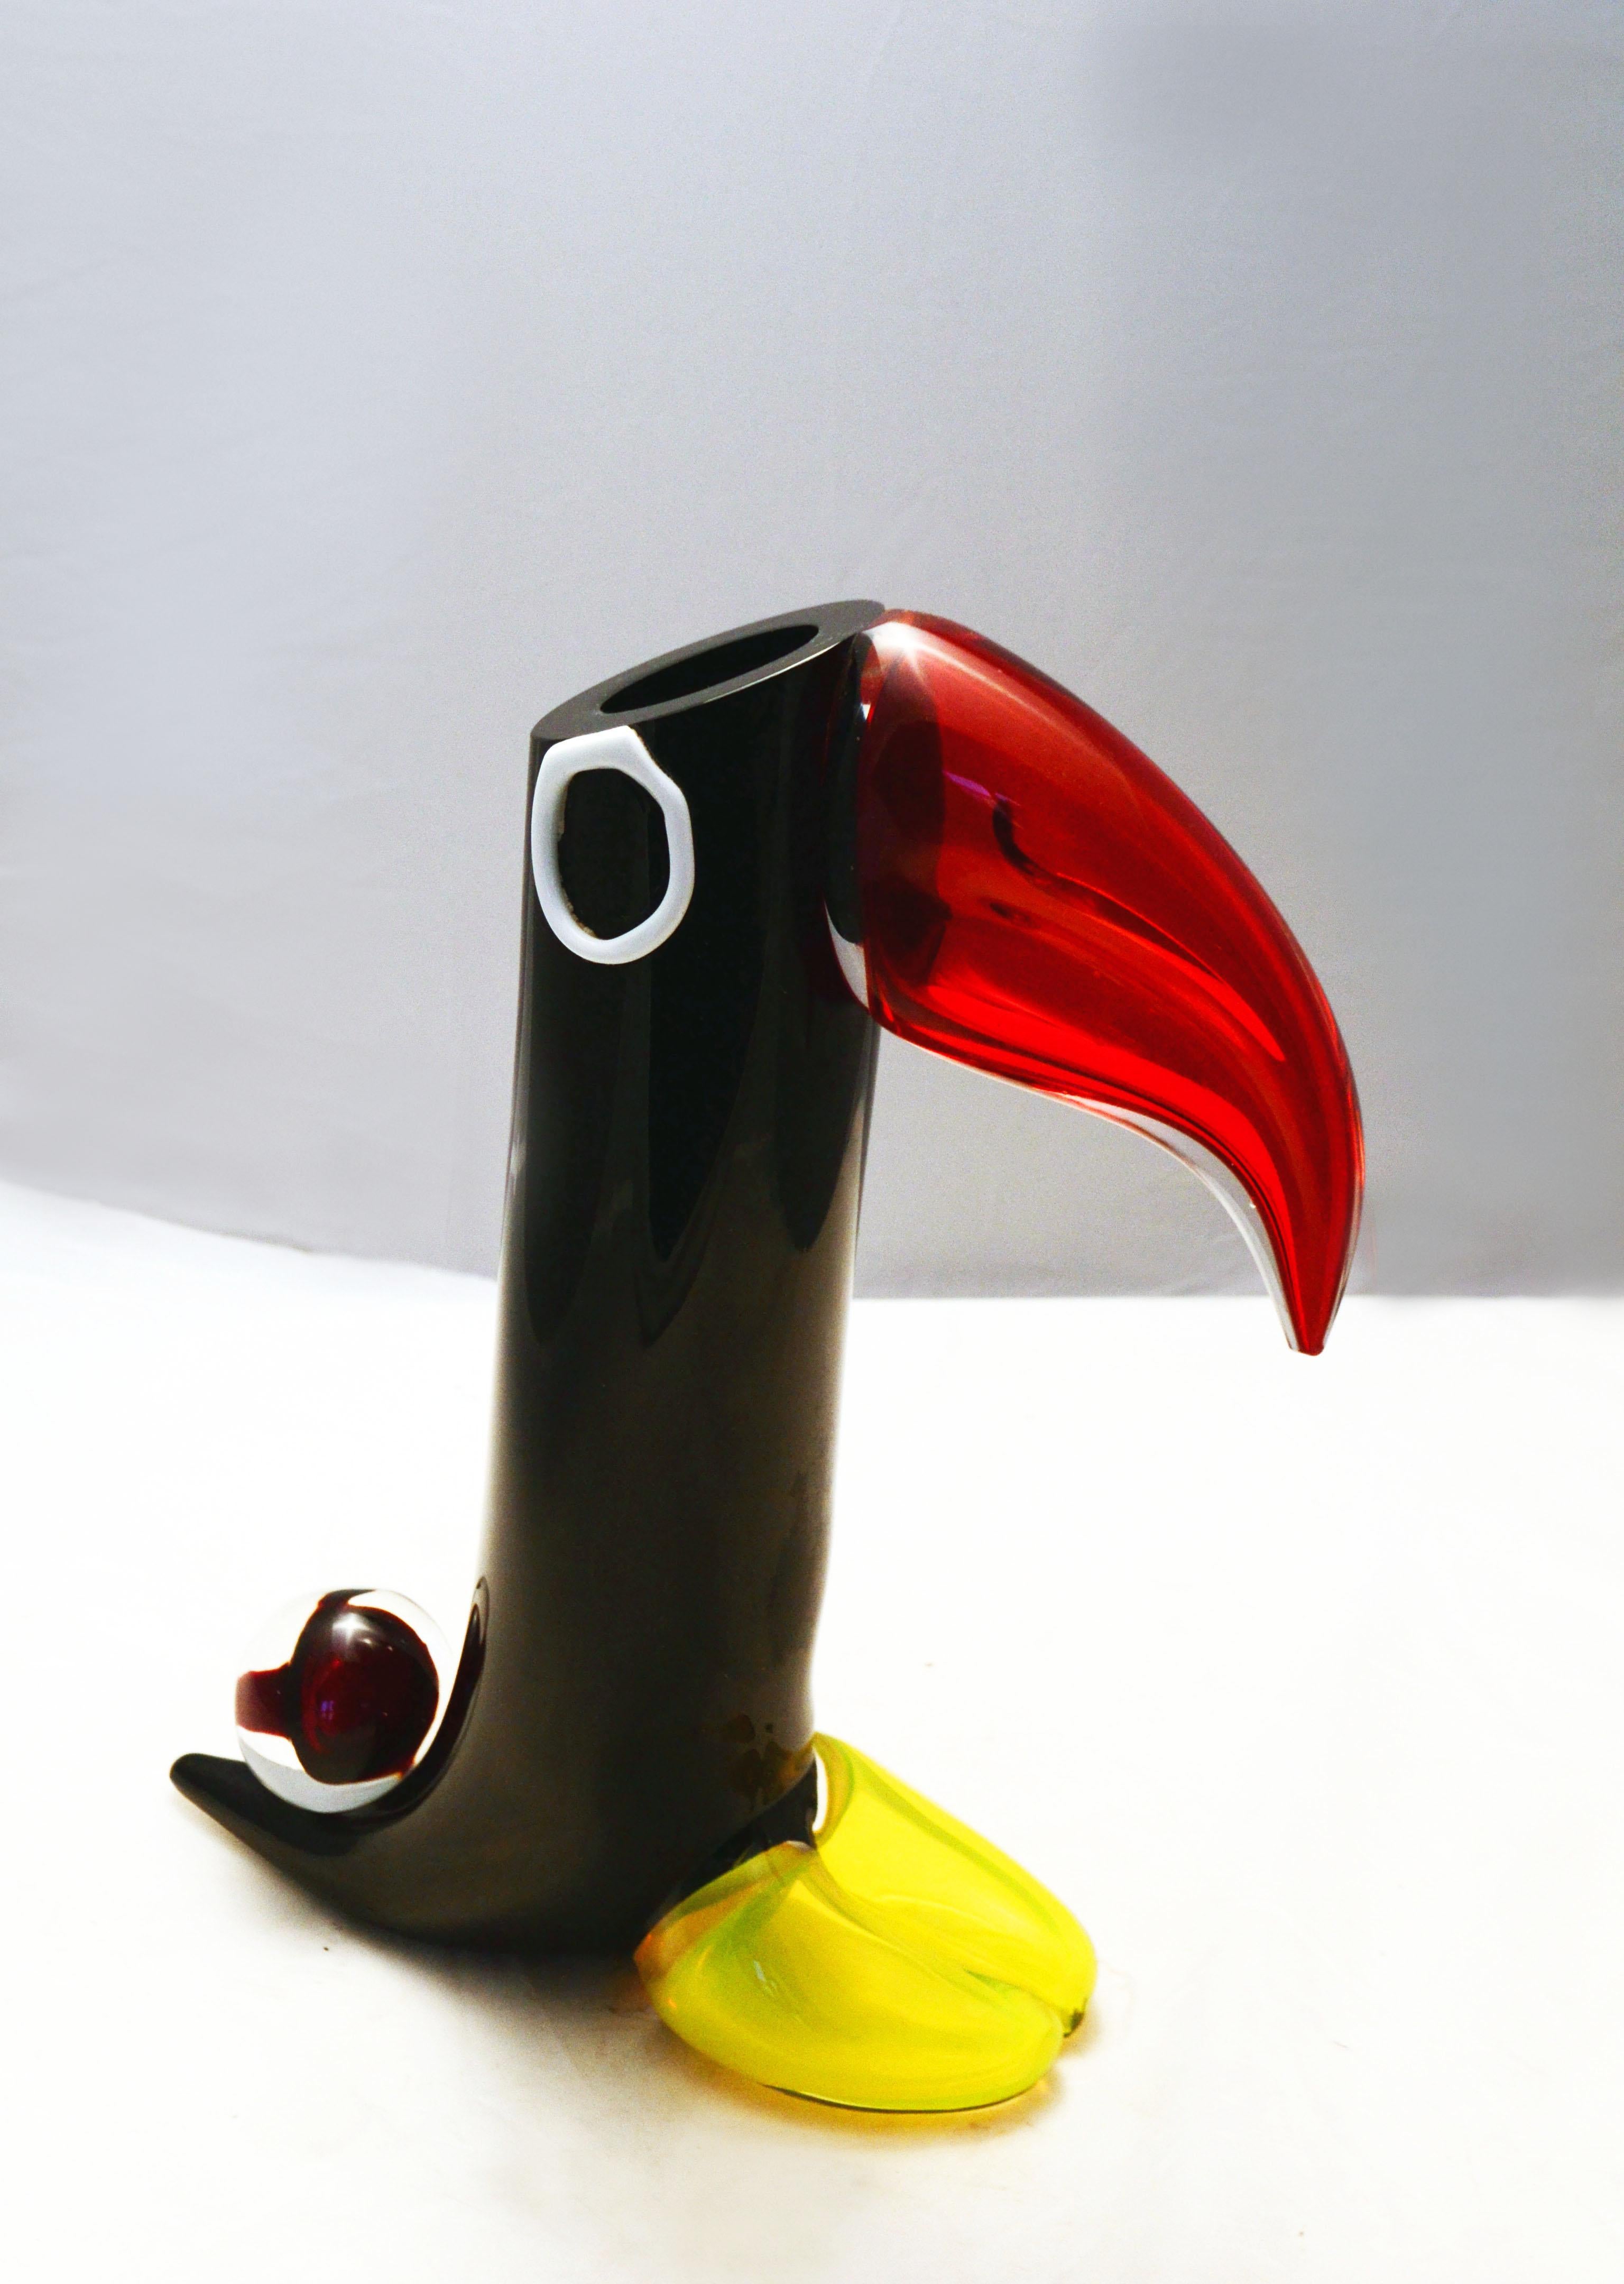 Sculpture unique piece by the master Carlo Moretti, Murano 1960s.
Handmade glass toucan with hot applications of glass of various colors.
Signed and dated.
In excellent condition.